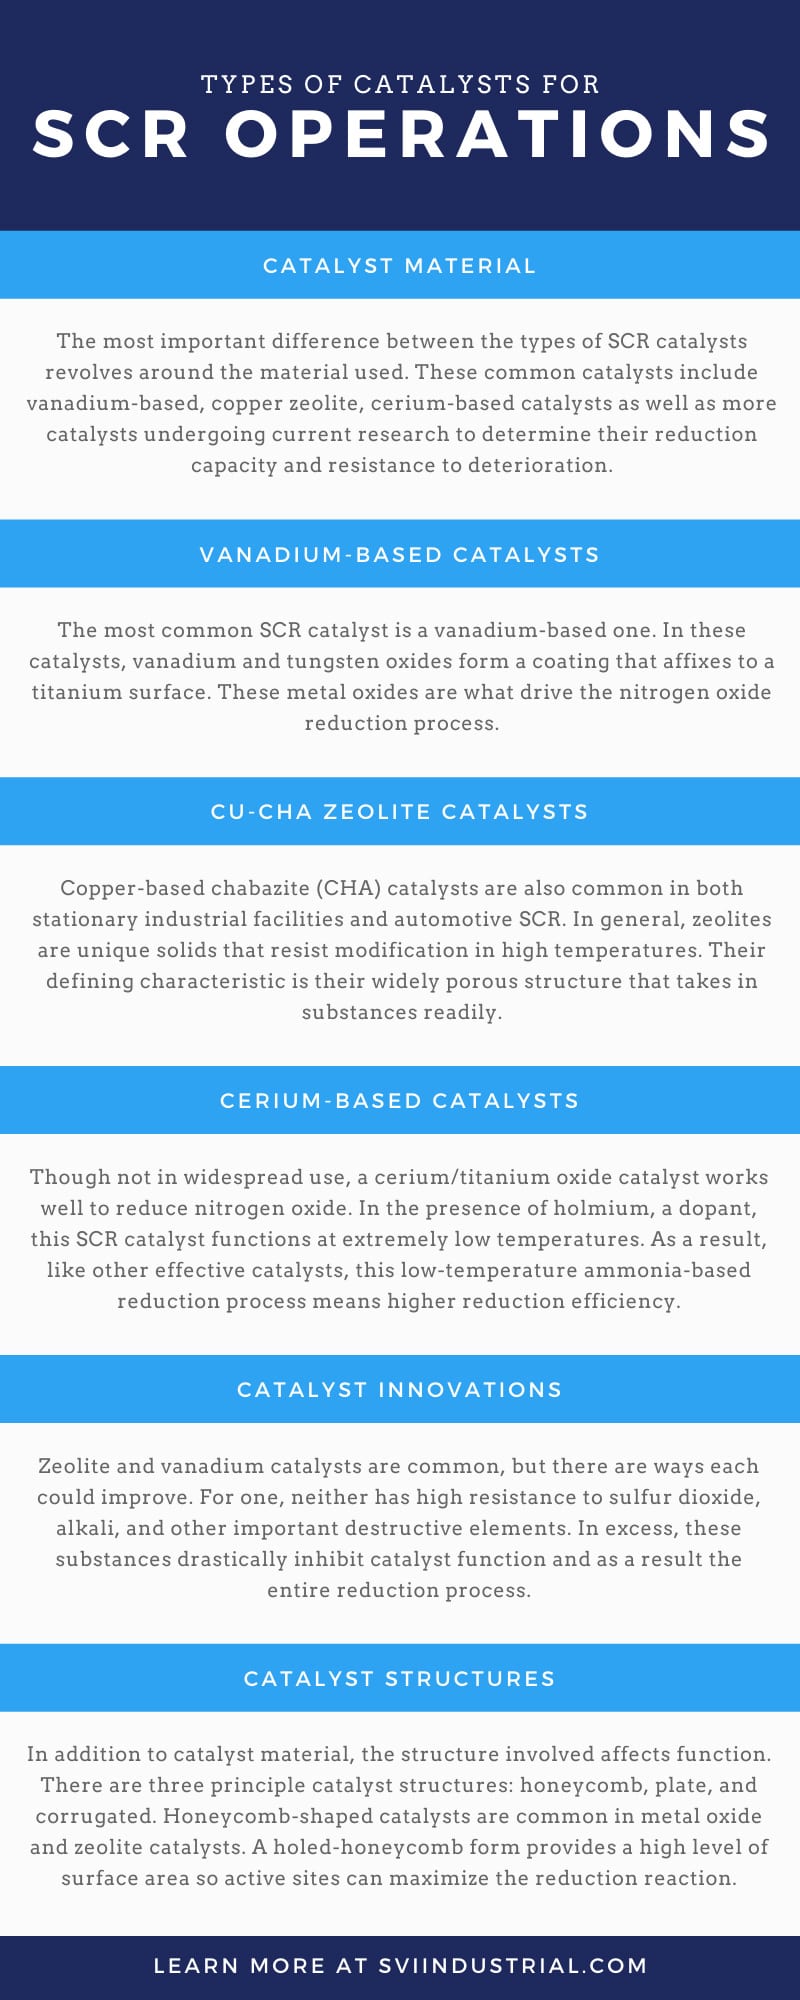 Types of Catalysts for SCR Operations